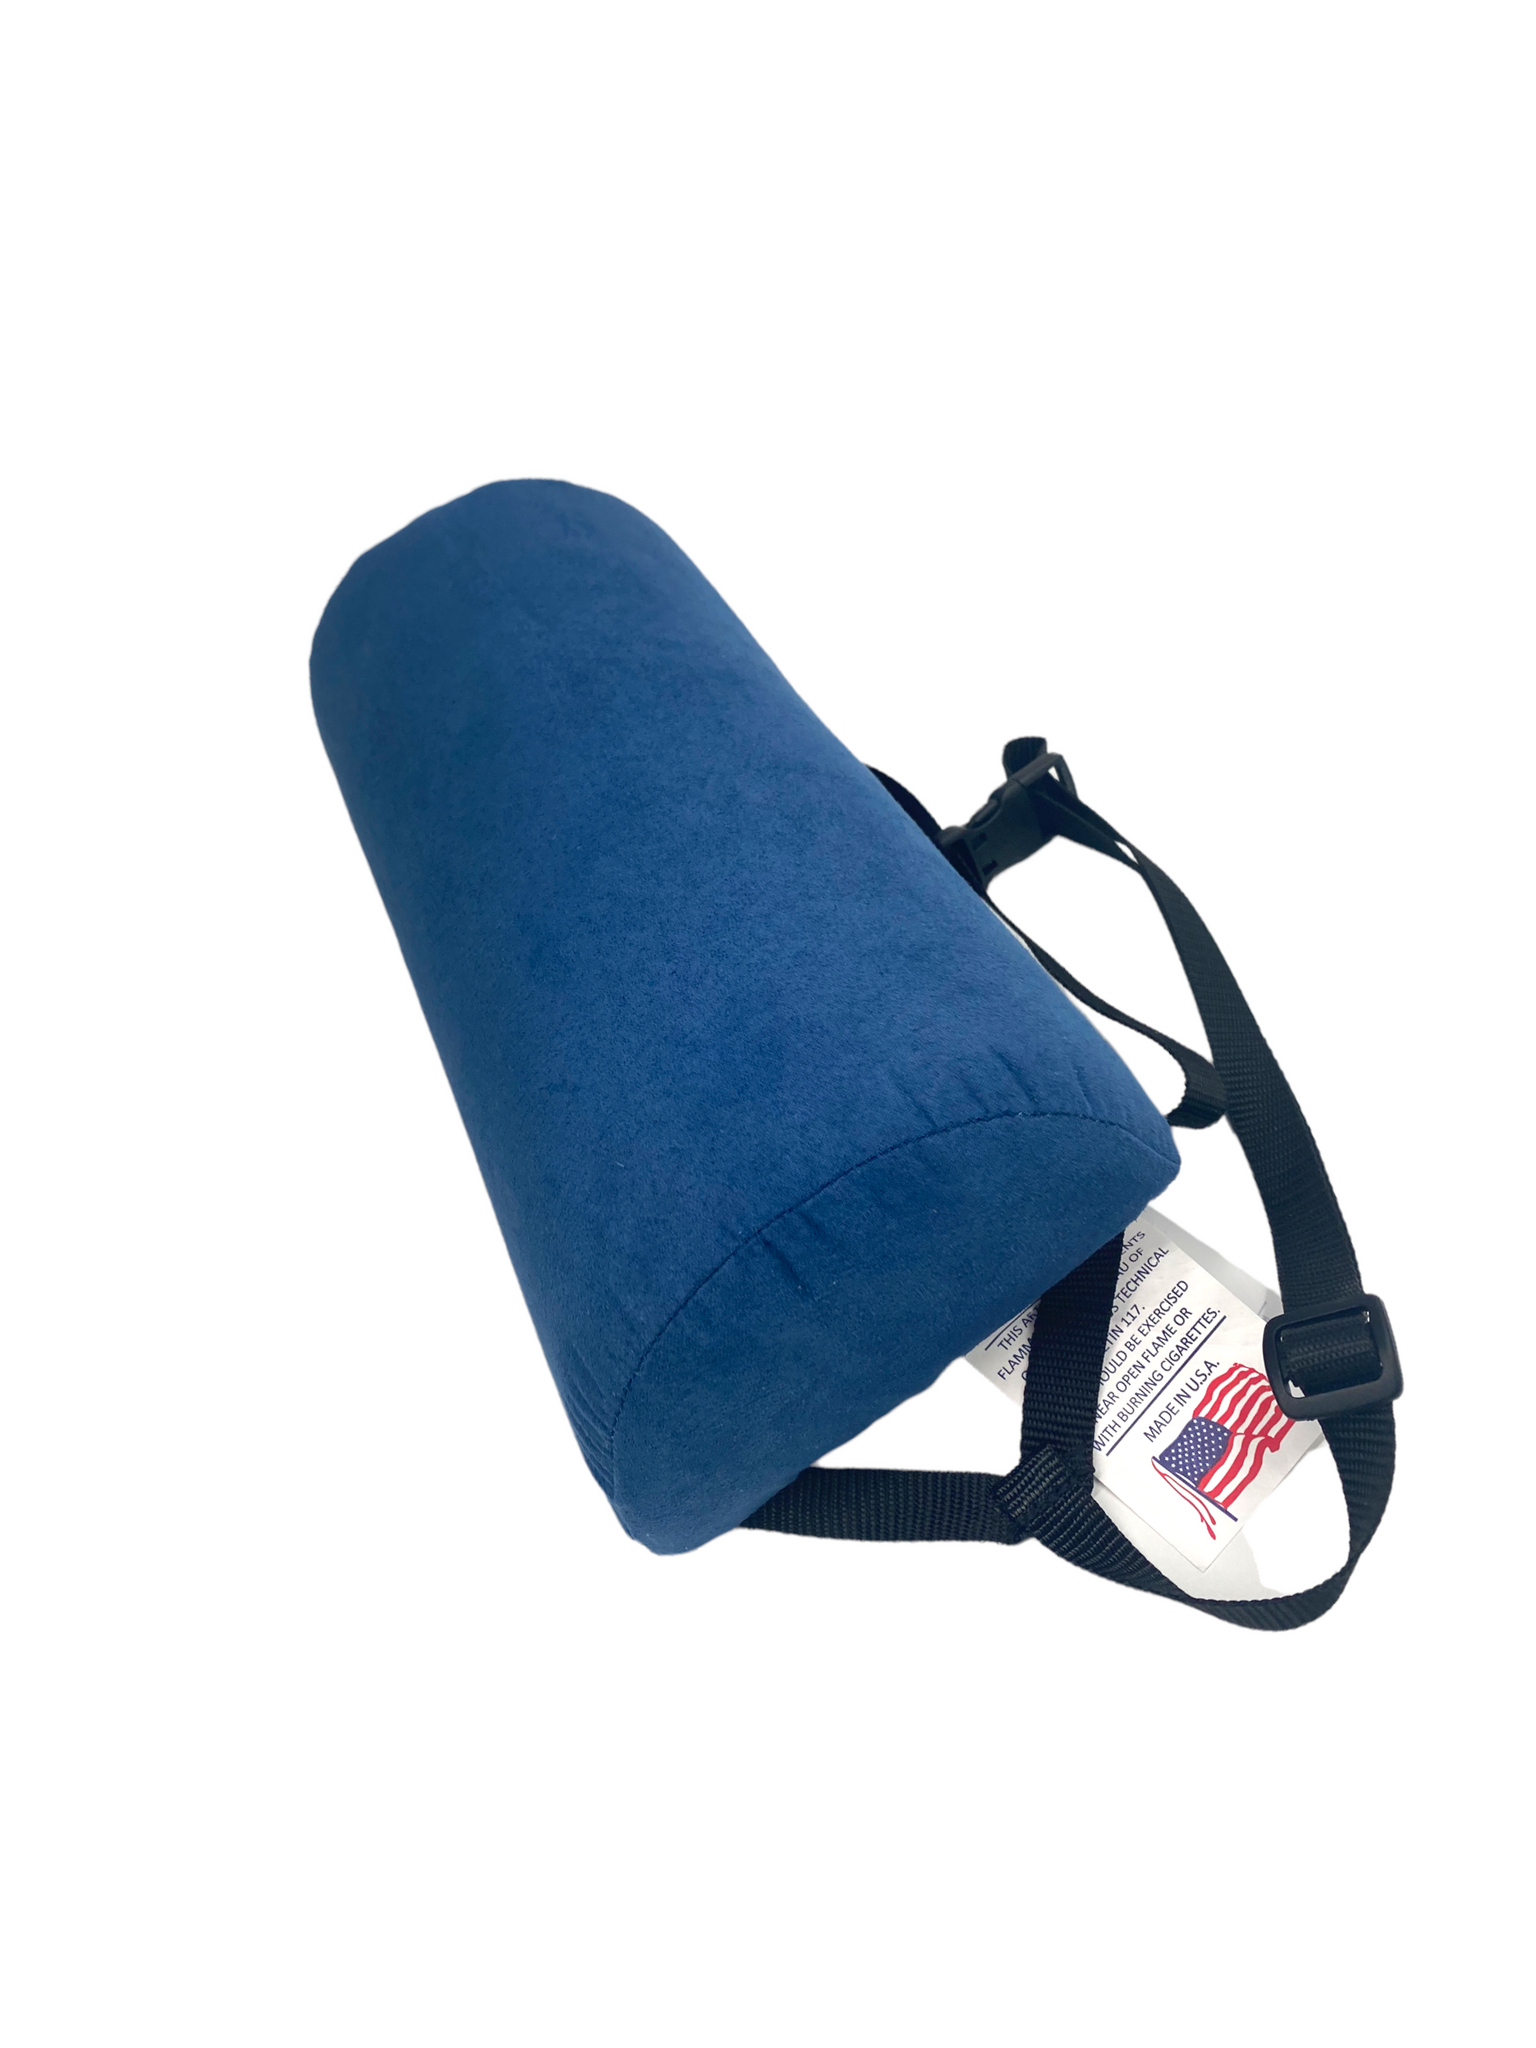 RELAX SUPPORT RS1 Lumbar Support Pillow - Office Chair Back Support - Chair  Cush